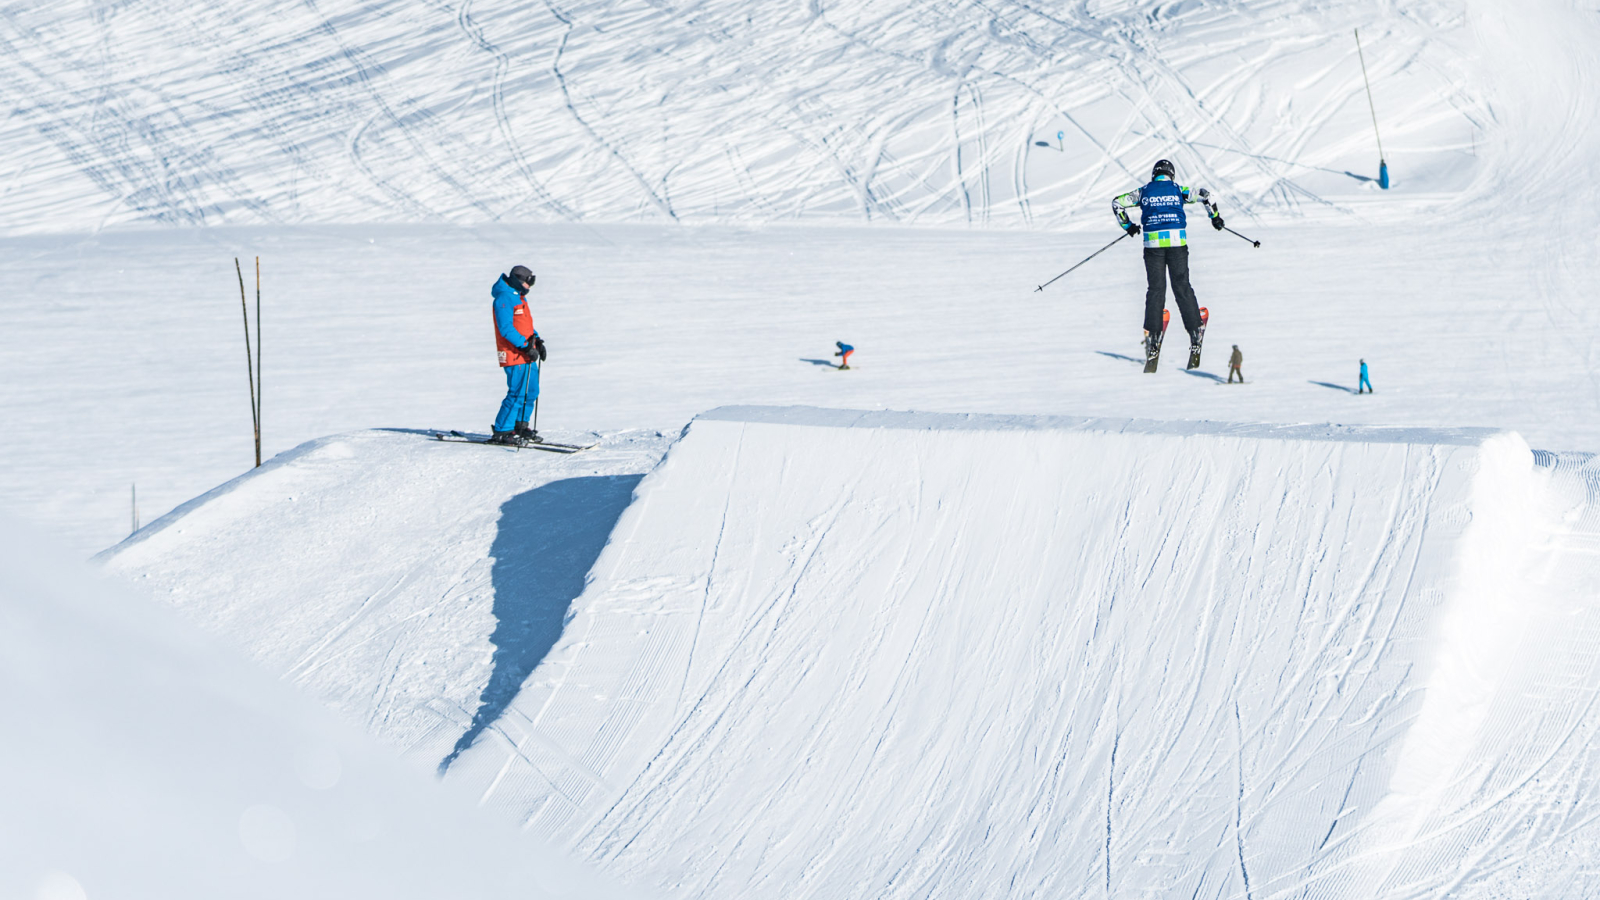 These lessons are aimed squarely at competent skiers from 12-17 years old who want to test themselves on some different aspects of skiing.